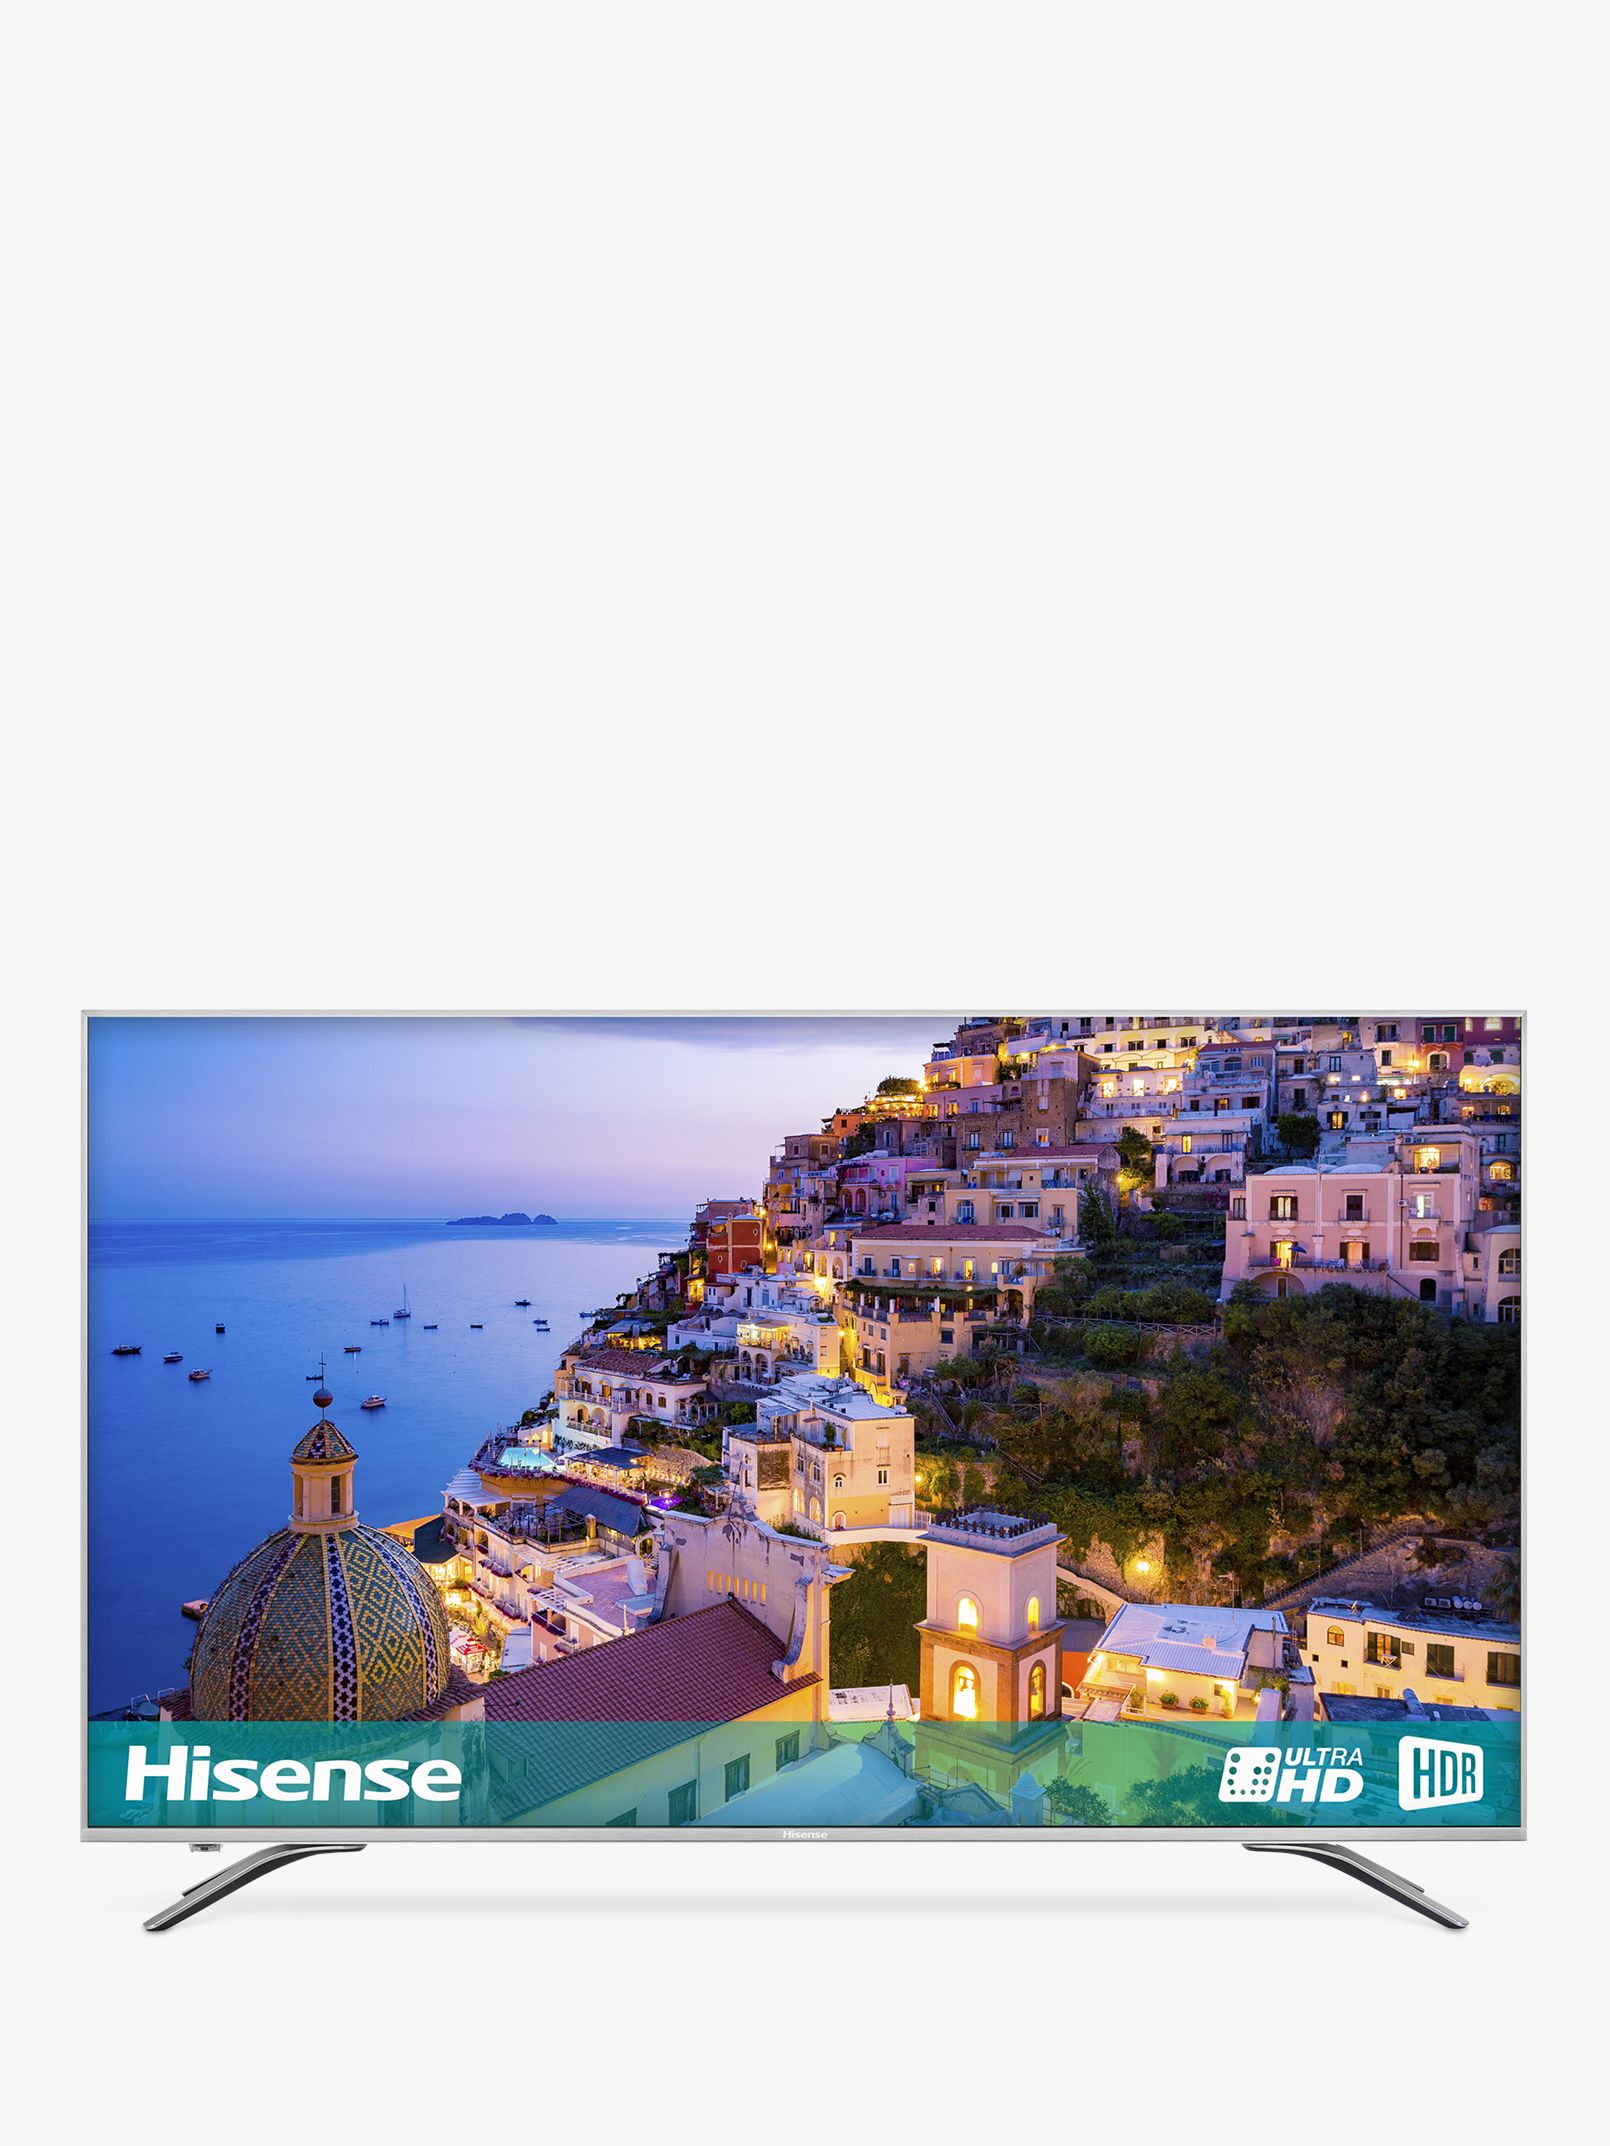 Hisense 50A6500 LED HDR 4K Ultra HD Smart TV, 50 with Freeview Play, Black/Silver